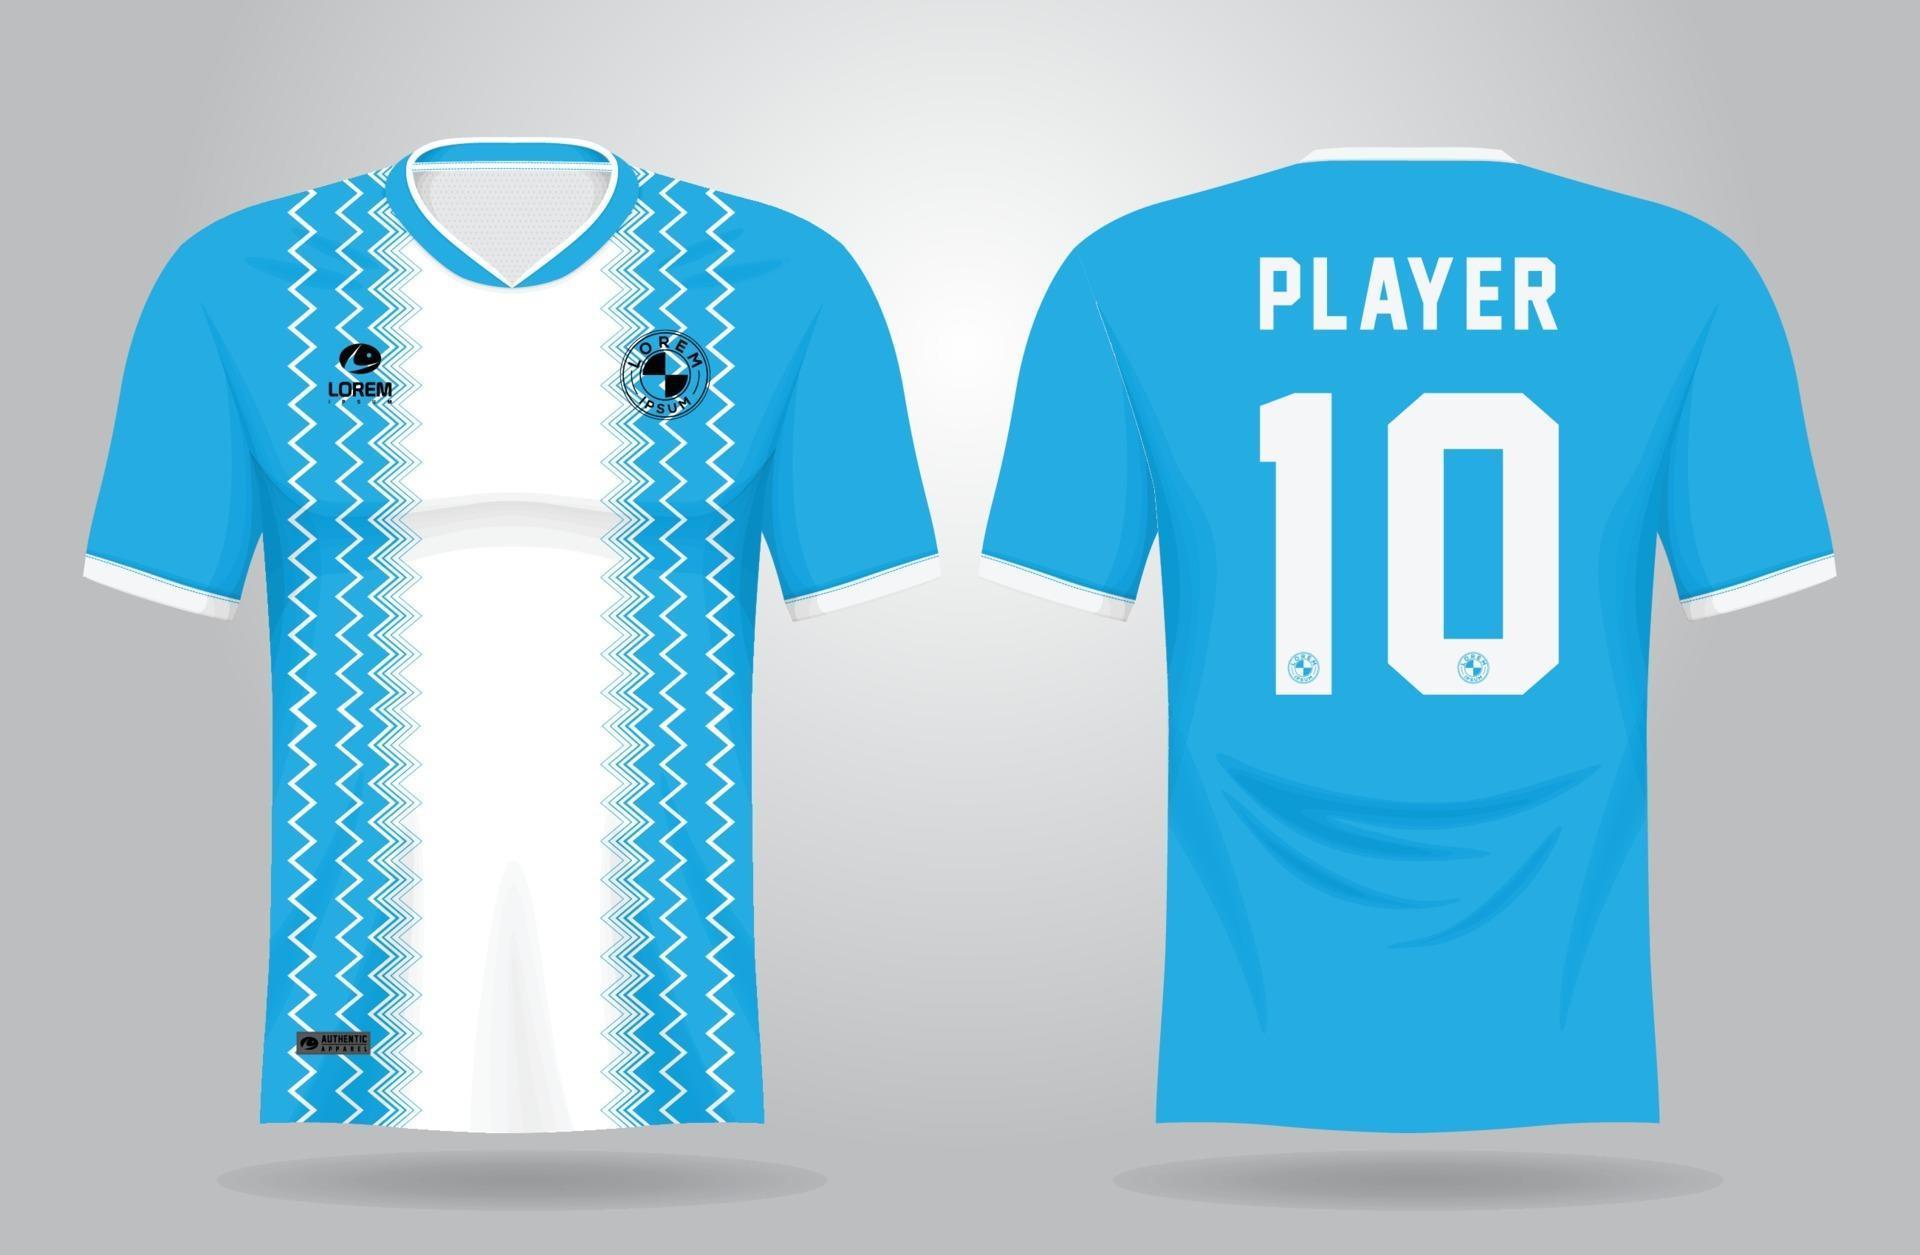 blue sports jersey template for team uniforms and Soccer t shirt design ...